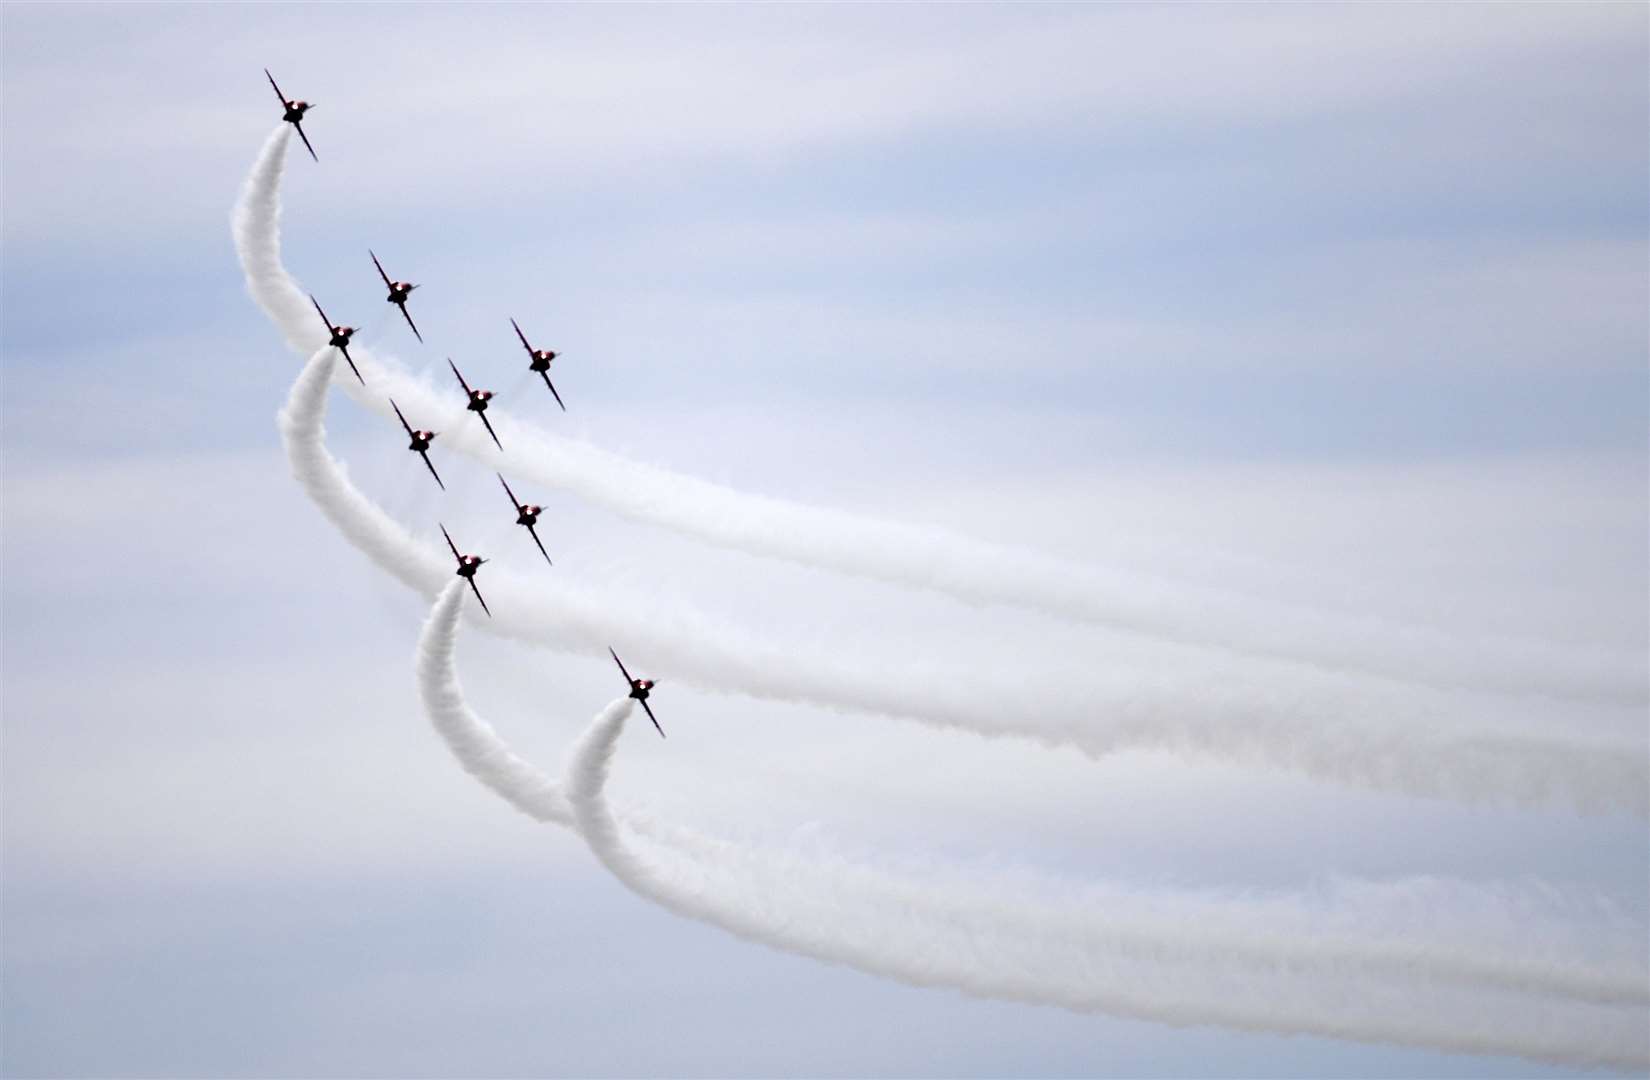 The Red Arrows display team over The Leas, folkestone, Sunday 22nd July, during the Folkestone air show. Picture: Barry Goodwin (3212753)